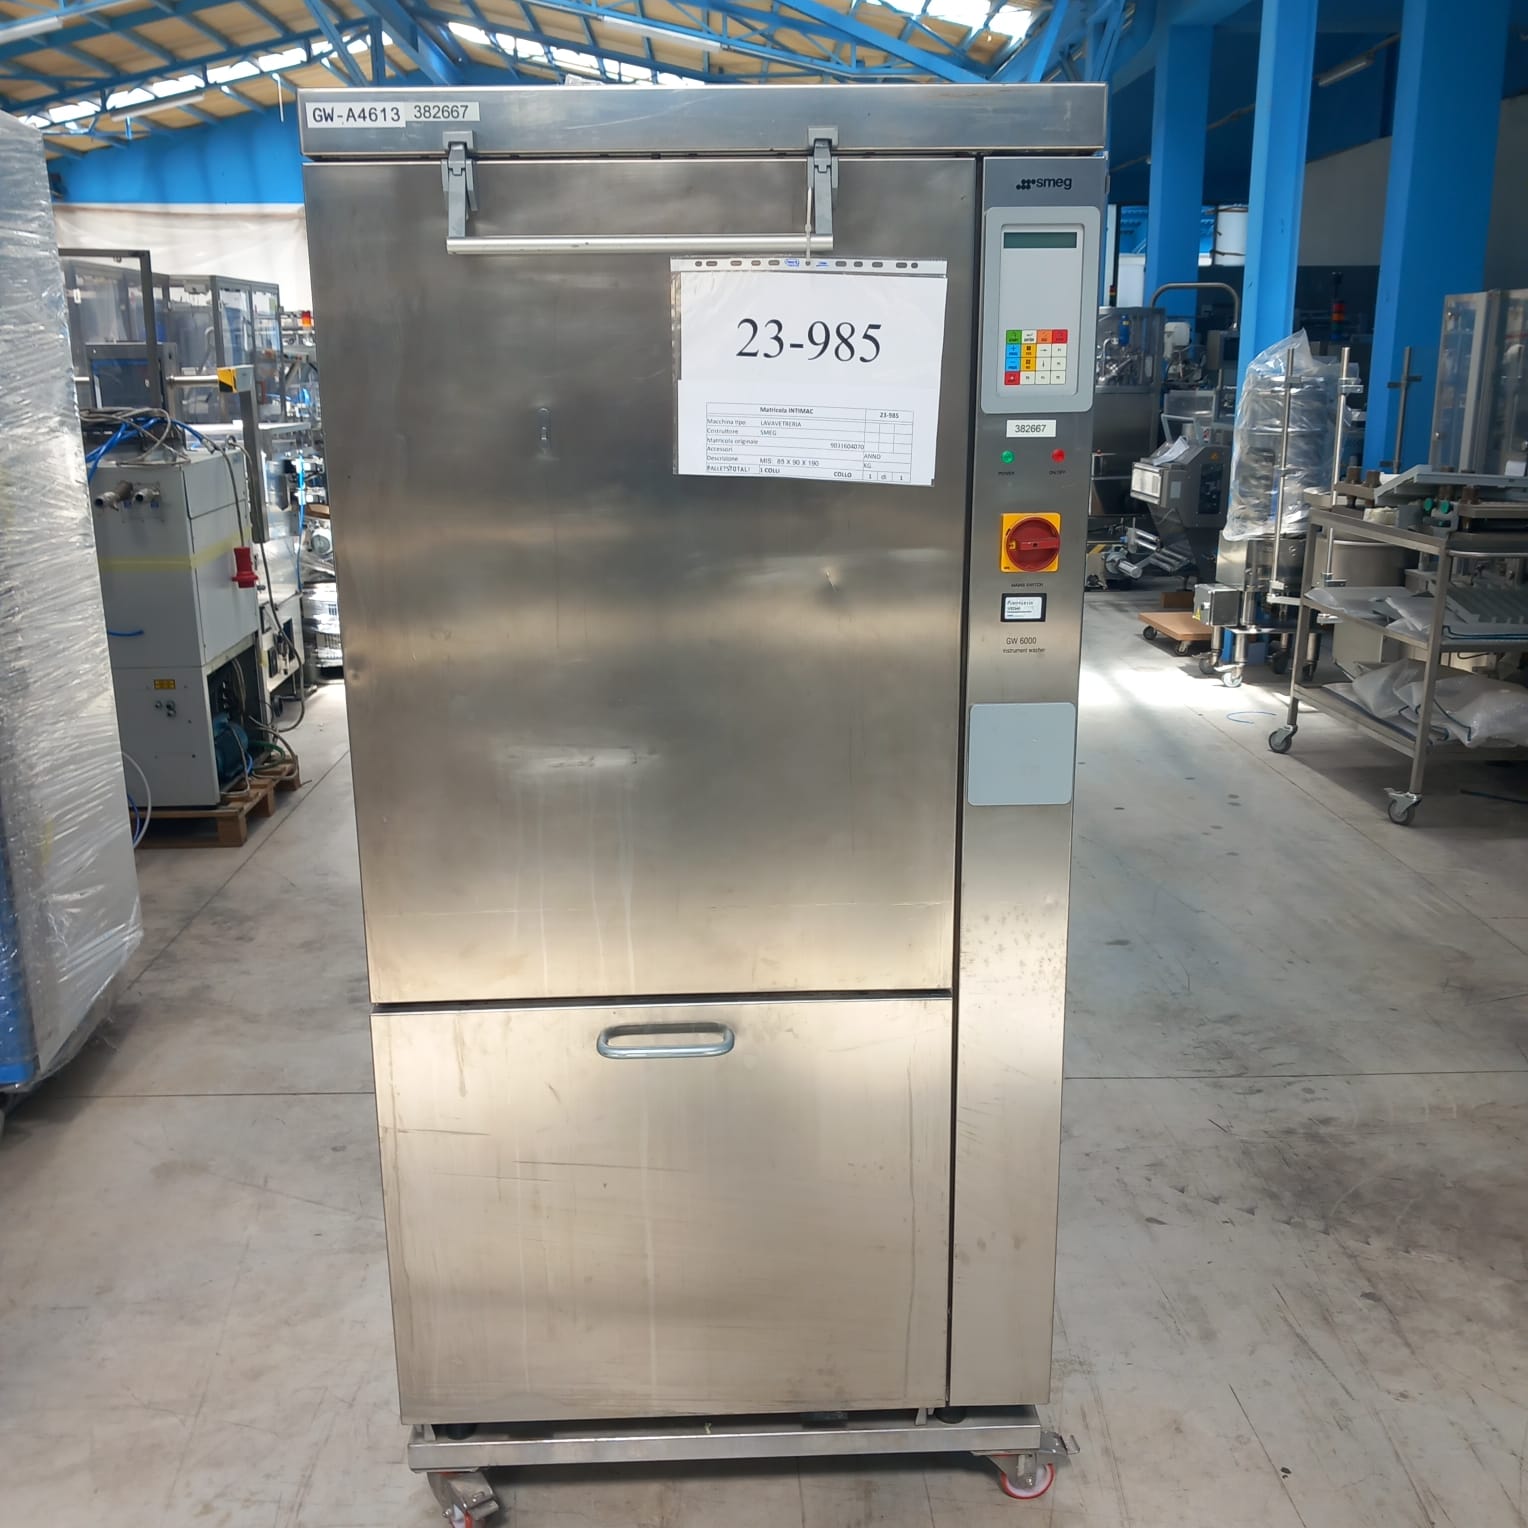 SMEG Washing Machines for Ampoules and Vials/Blowing Table for Bottles SMEG GW6000